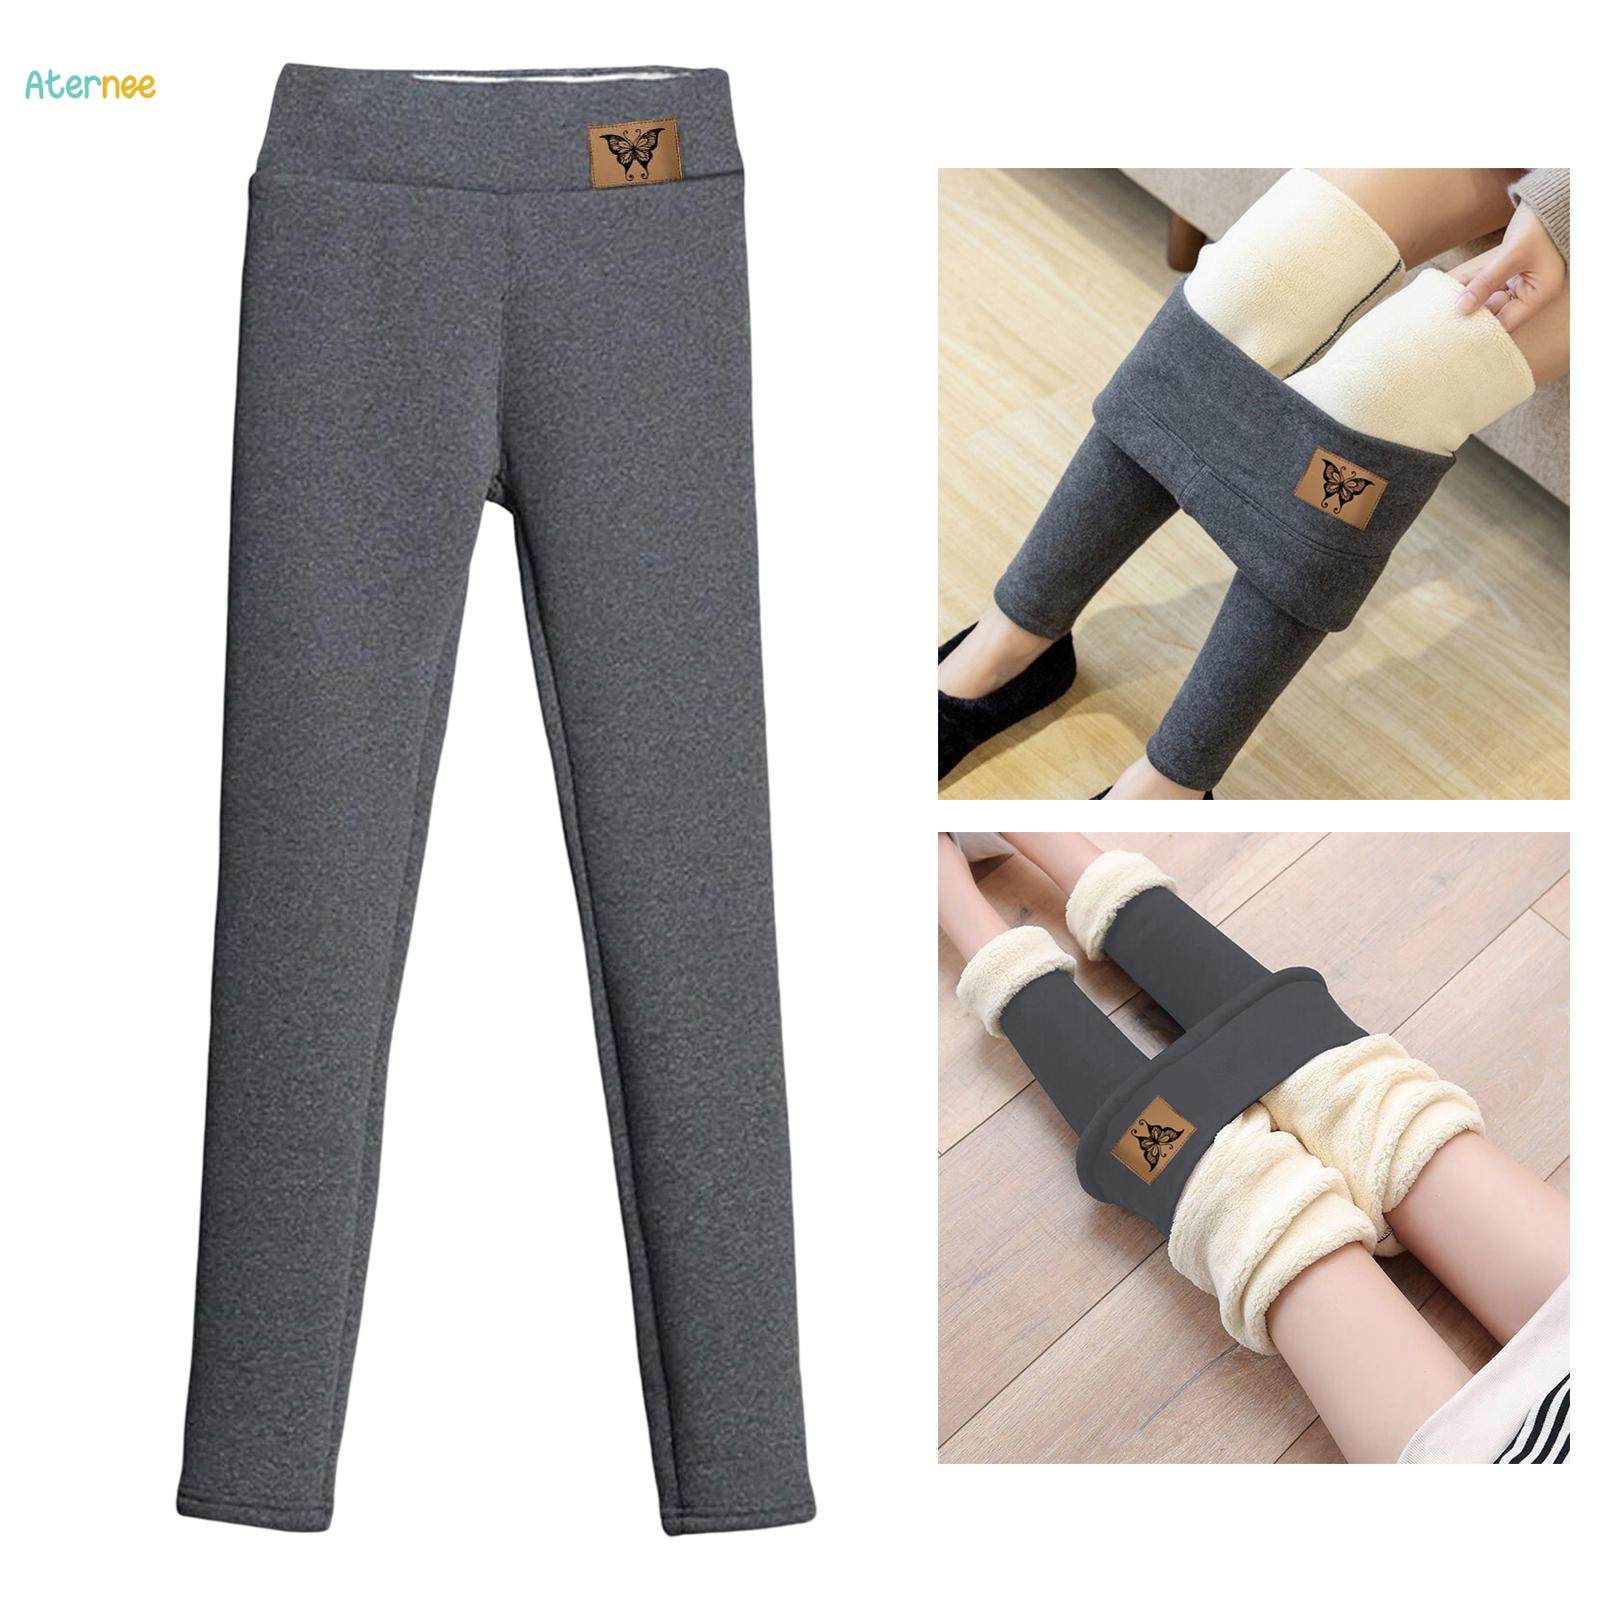 Women Winter Leggings Thermal Elastic Tights Pants Soft Skinny Fleece Lined  Thick for Running, Hiking, Yoga , XXL